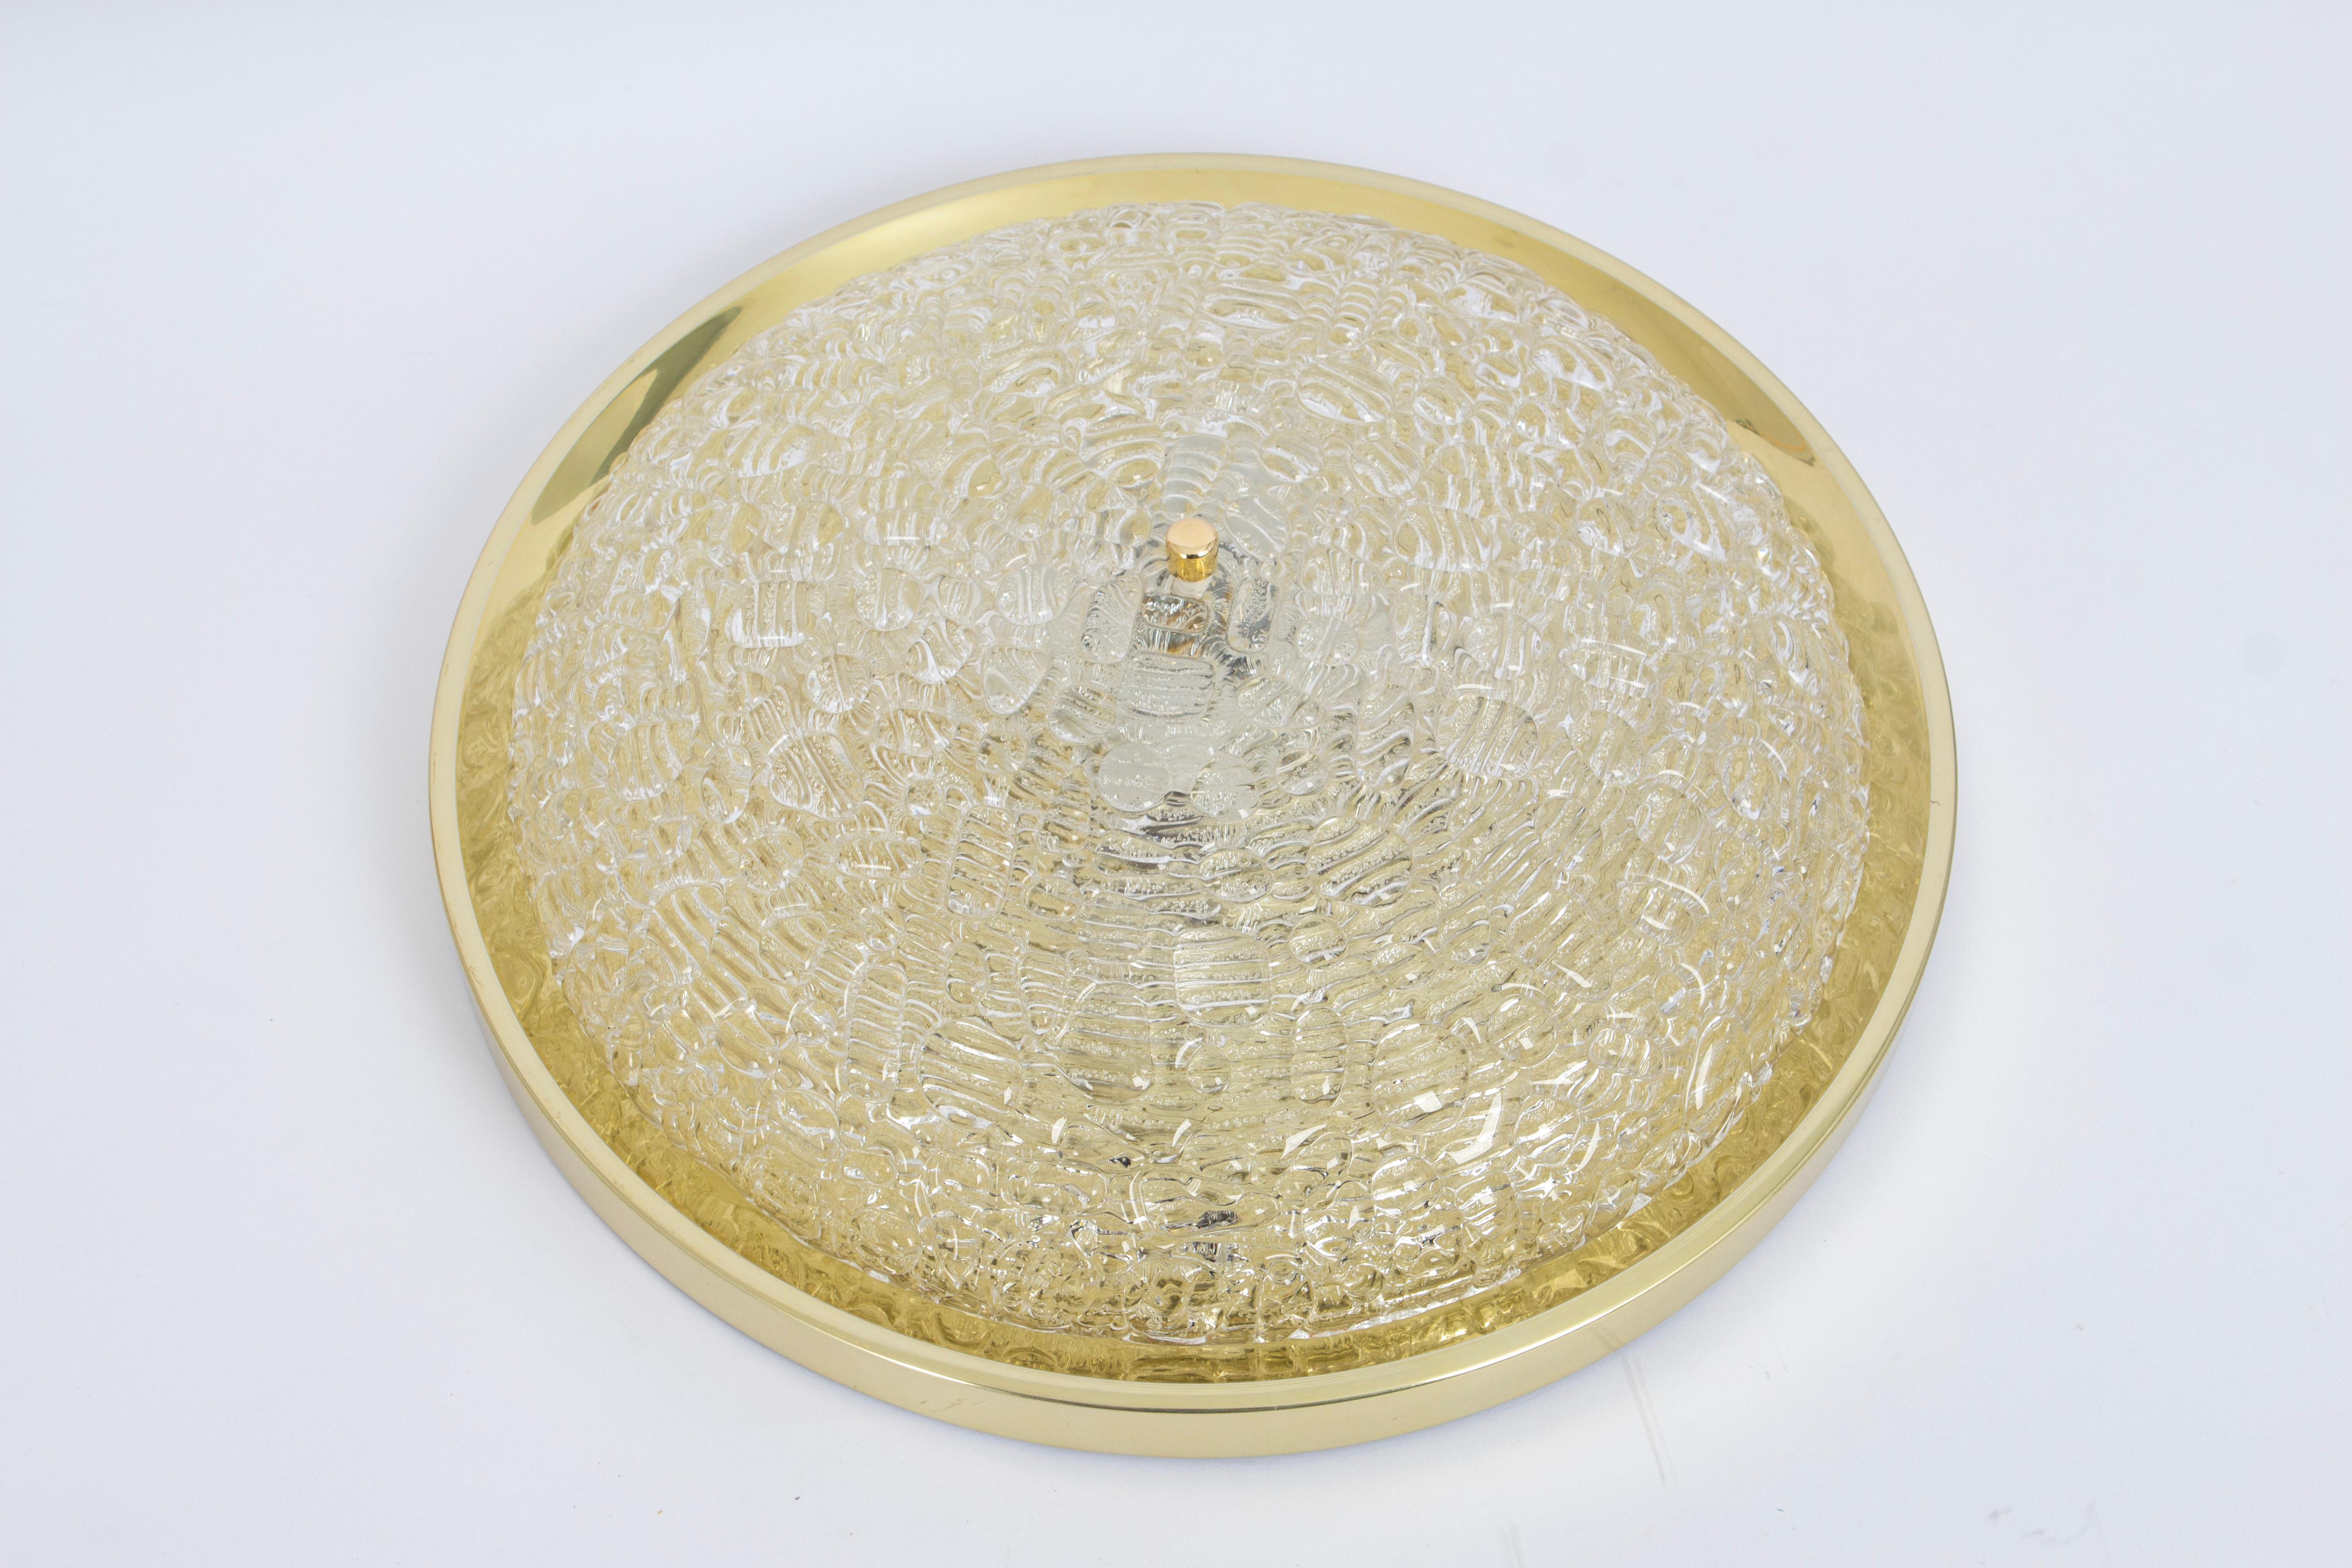 A round biomorphic clear glass wall sconce or flush mount designed by Doira Leuchten, manufactured in Germany, circa 1970s.

High quality and in very good condition. Cleaned, well-wired and ready to use.

The fixture requires 4 x E27 Standard